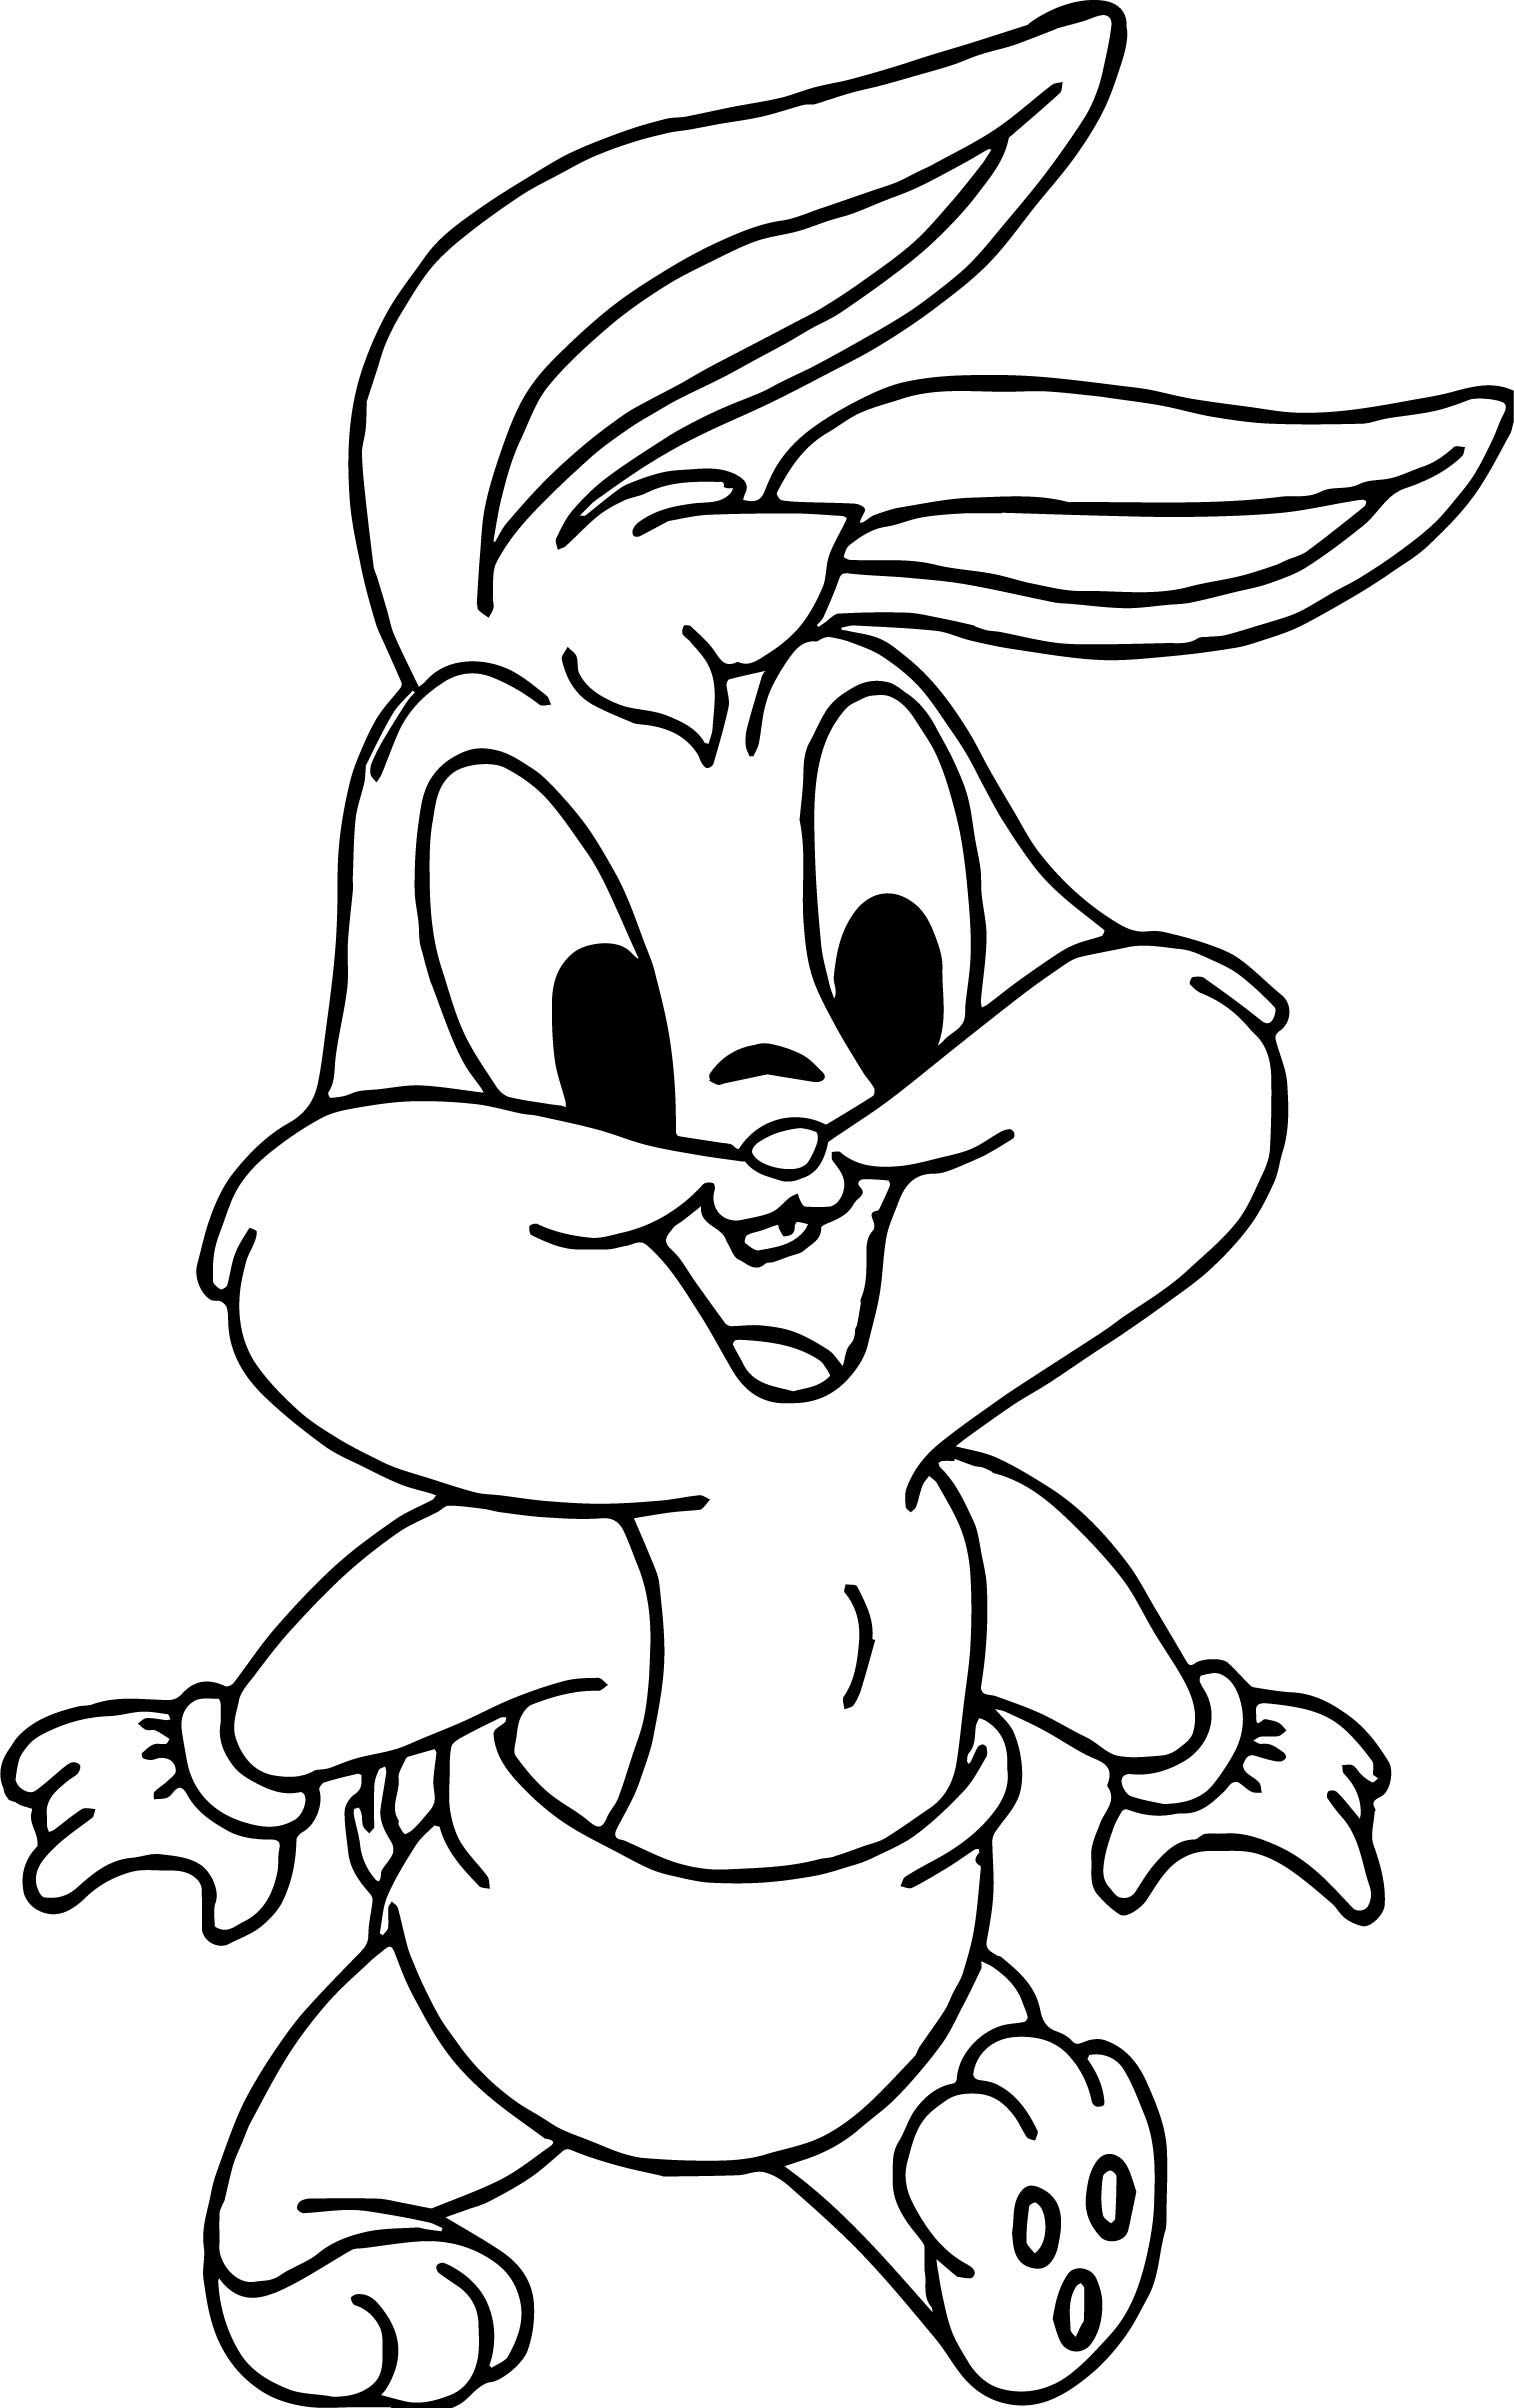 The Looney Tunes Baby Bugs Bunny Coloring Page